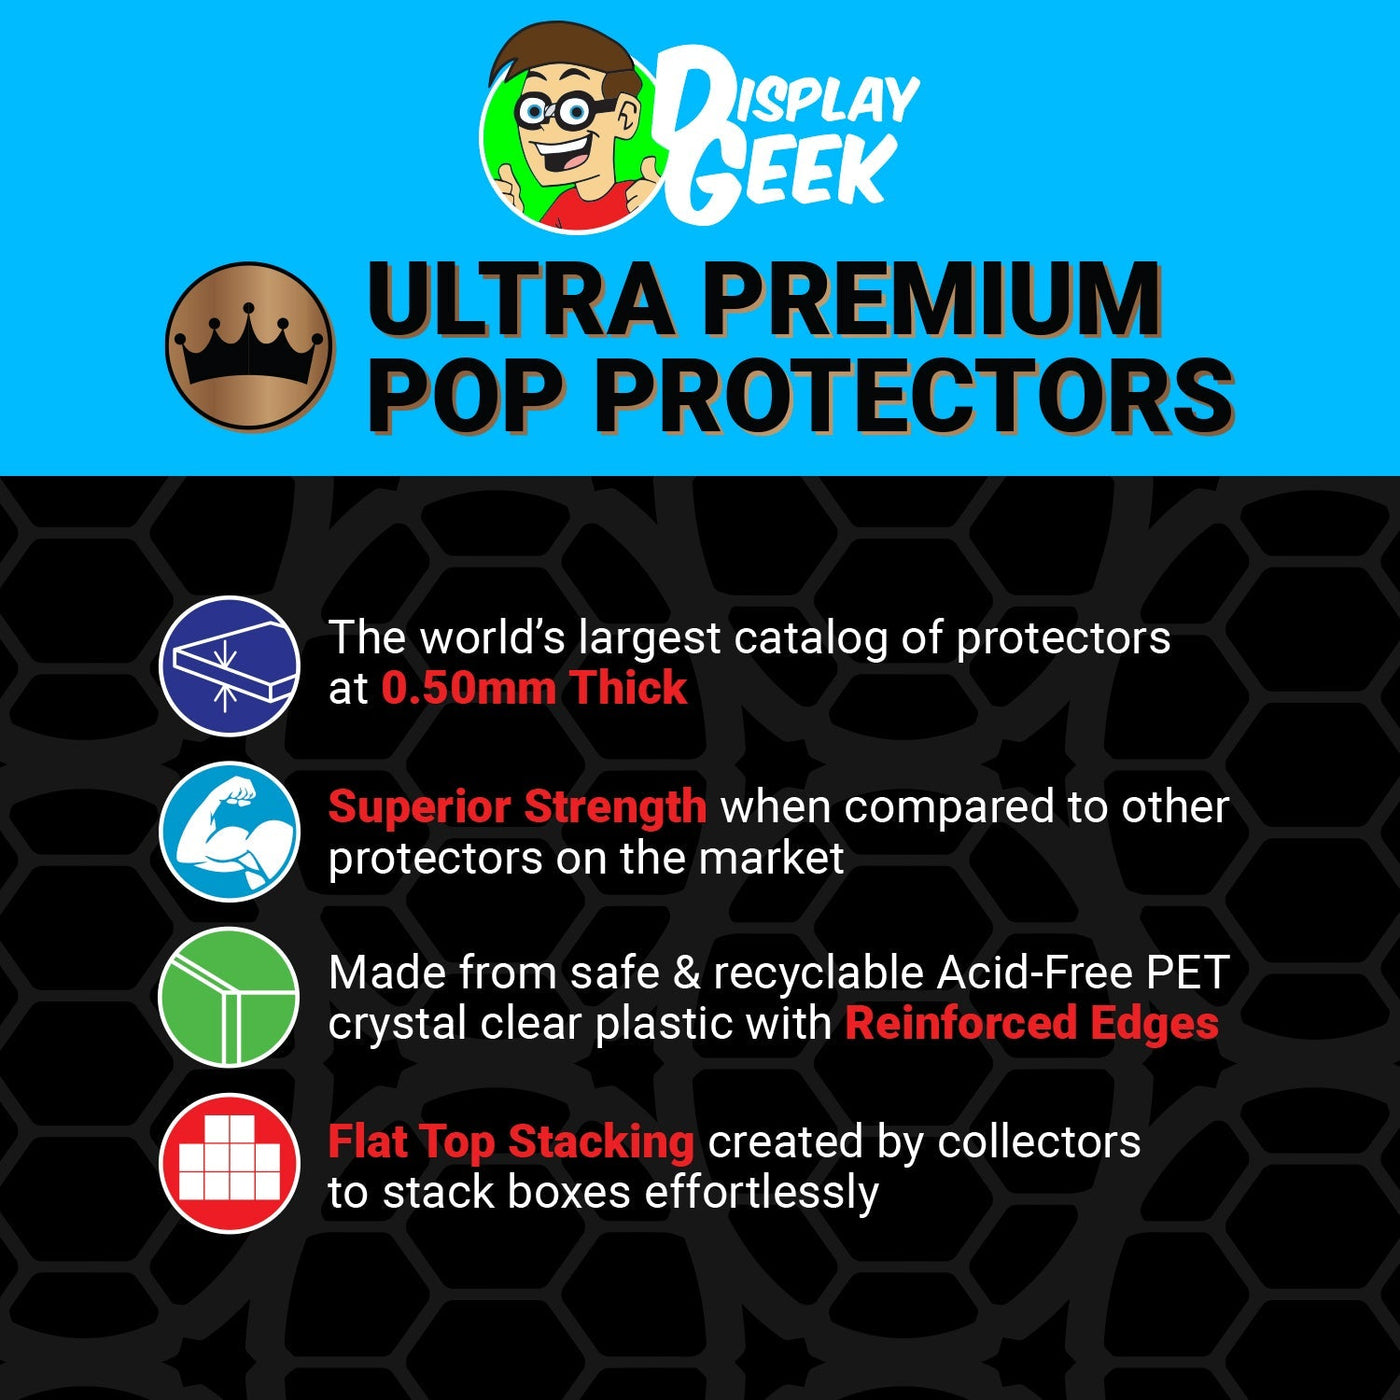 Pop Protector for Betty Boop Color Funko Pop Pez on The Protector Guide App by Display Geek